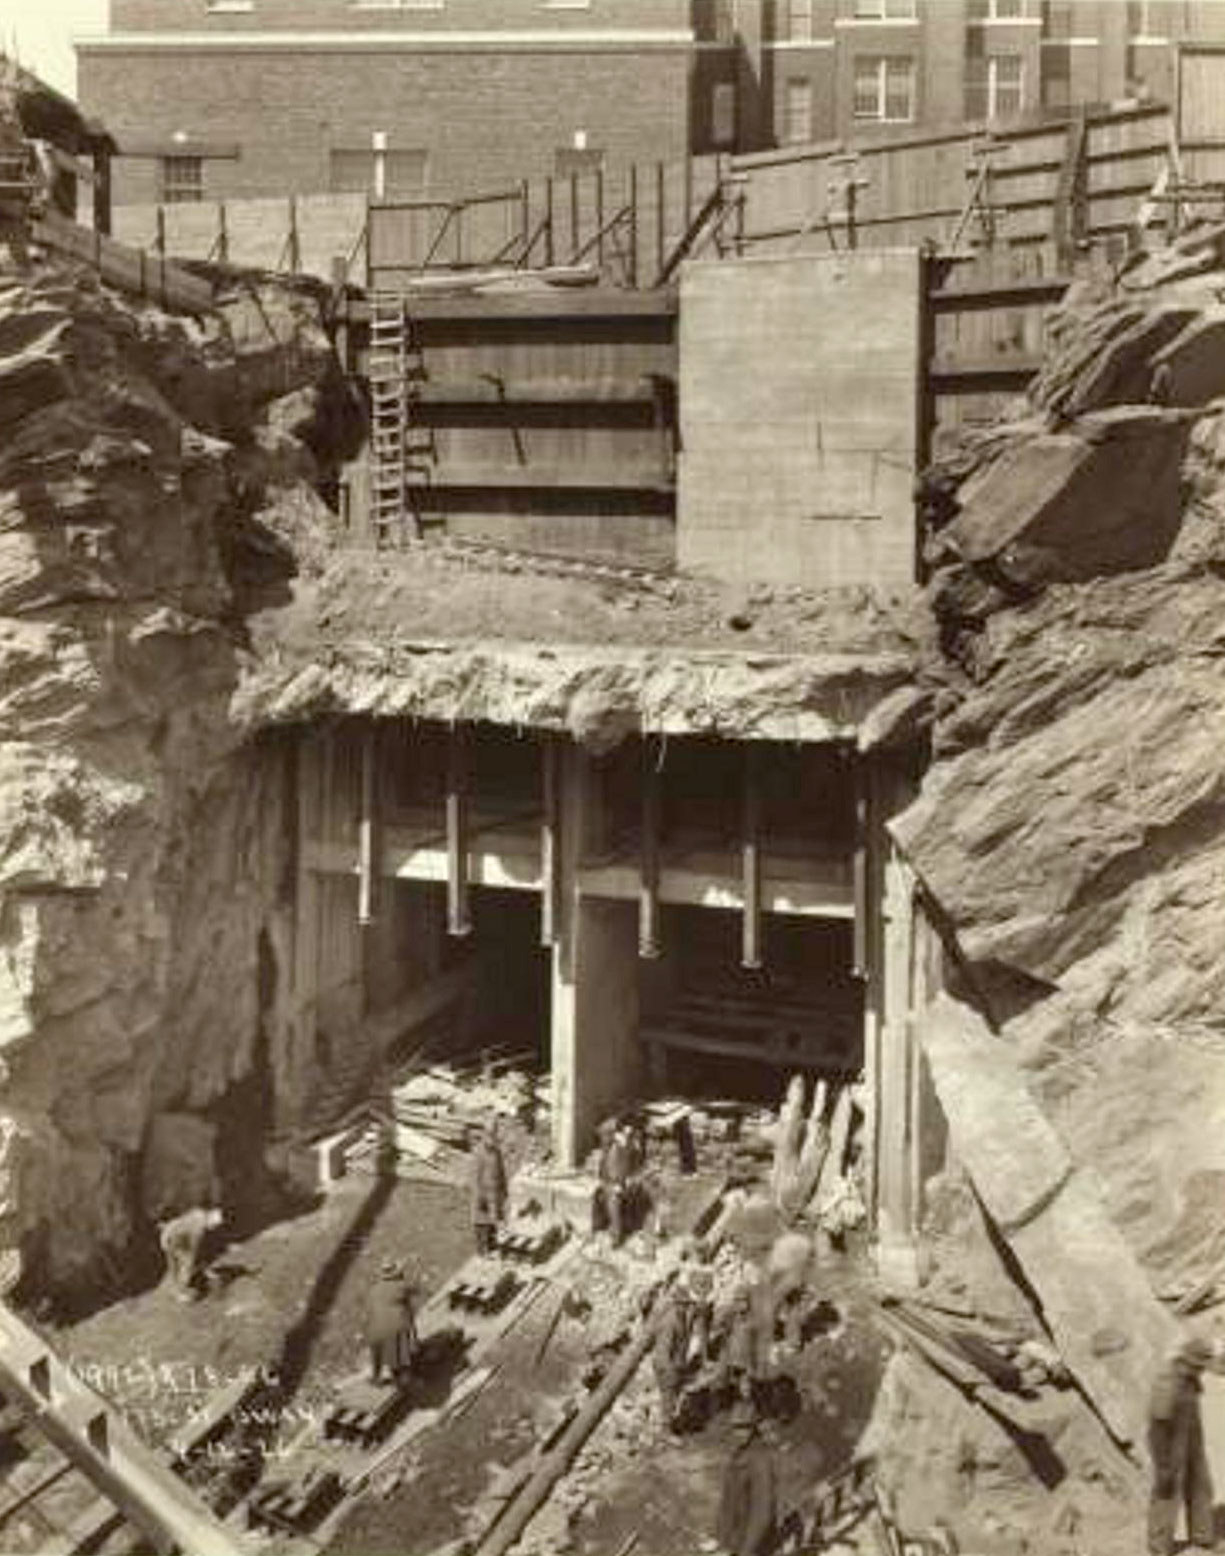 A view of a deep underground construction for subway excavation